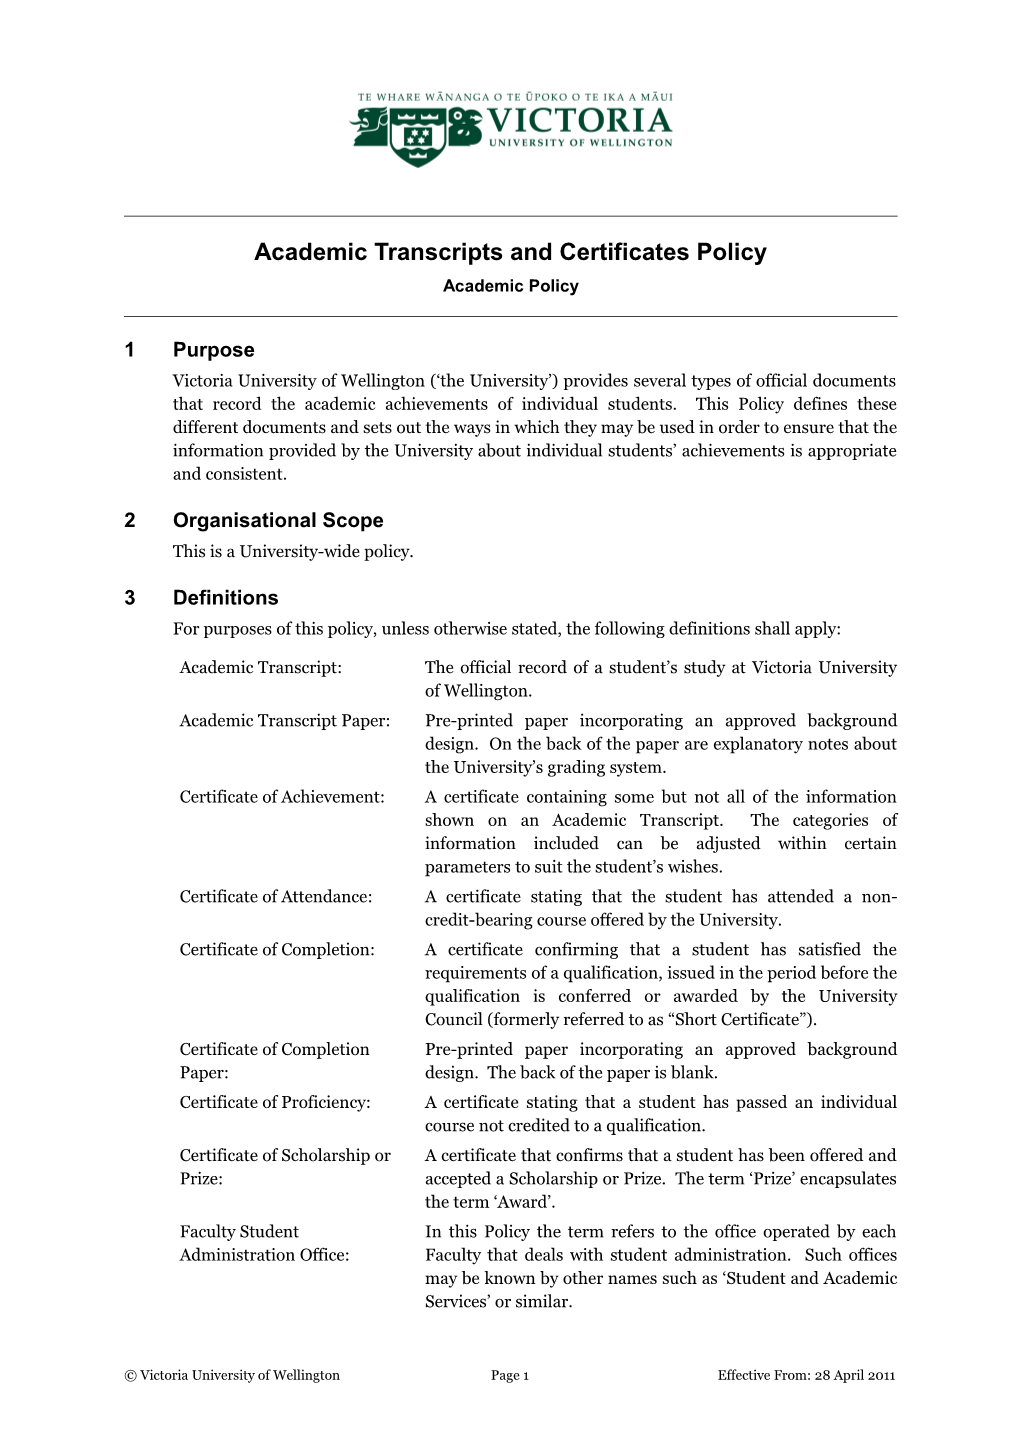 Academic Transcripts and Certificates Policy